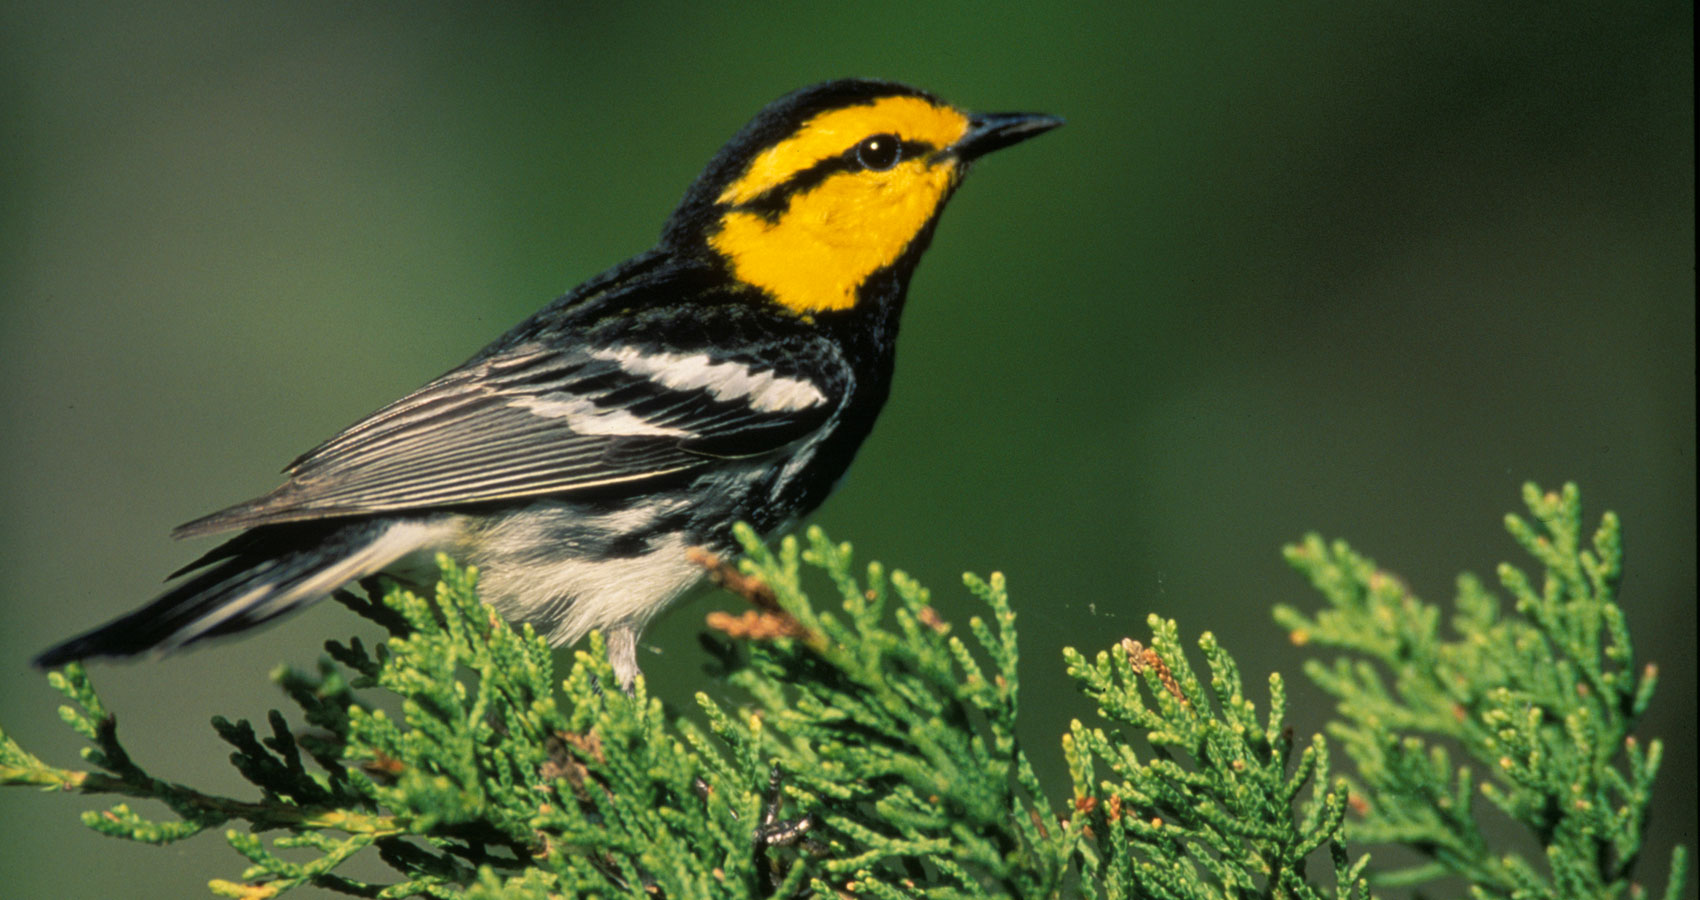 THE LOVE SONG OF A WARBLER, by Dr Santosh Bakaya at Spillwords.com